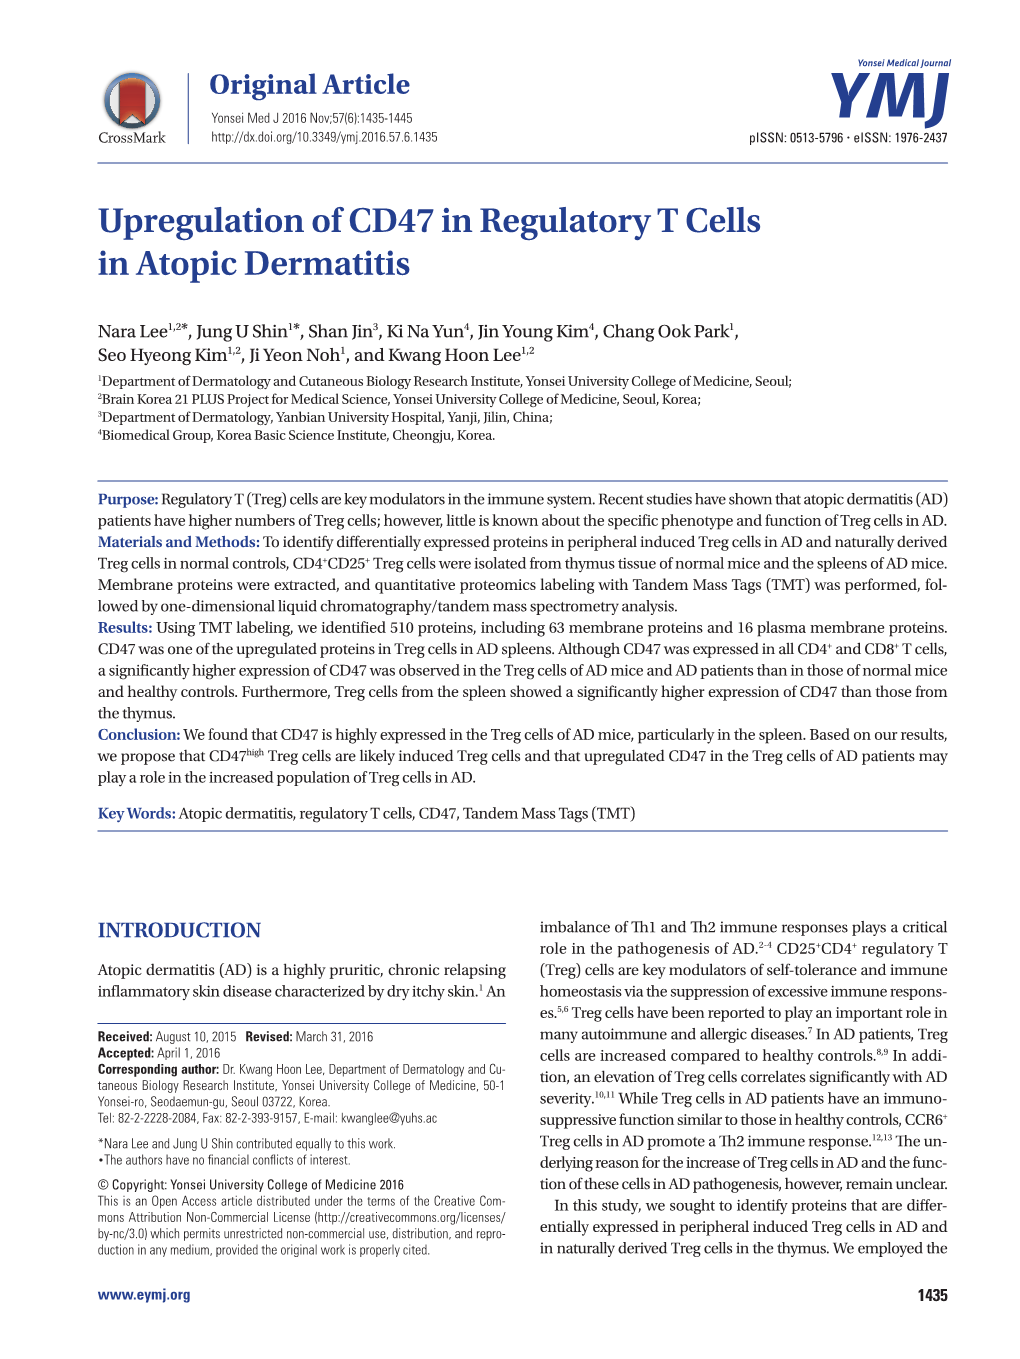 Upregulation of CD47 in Regulatory T Cells in Atopic Dermatitis